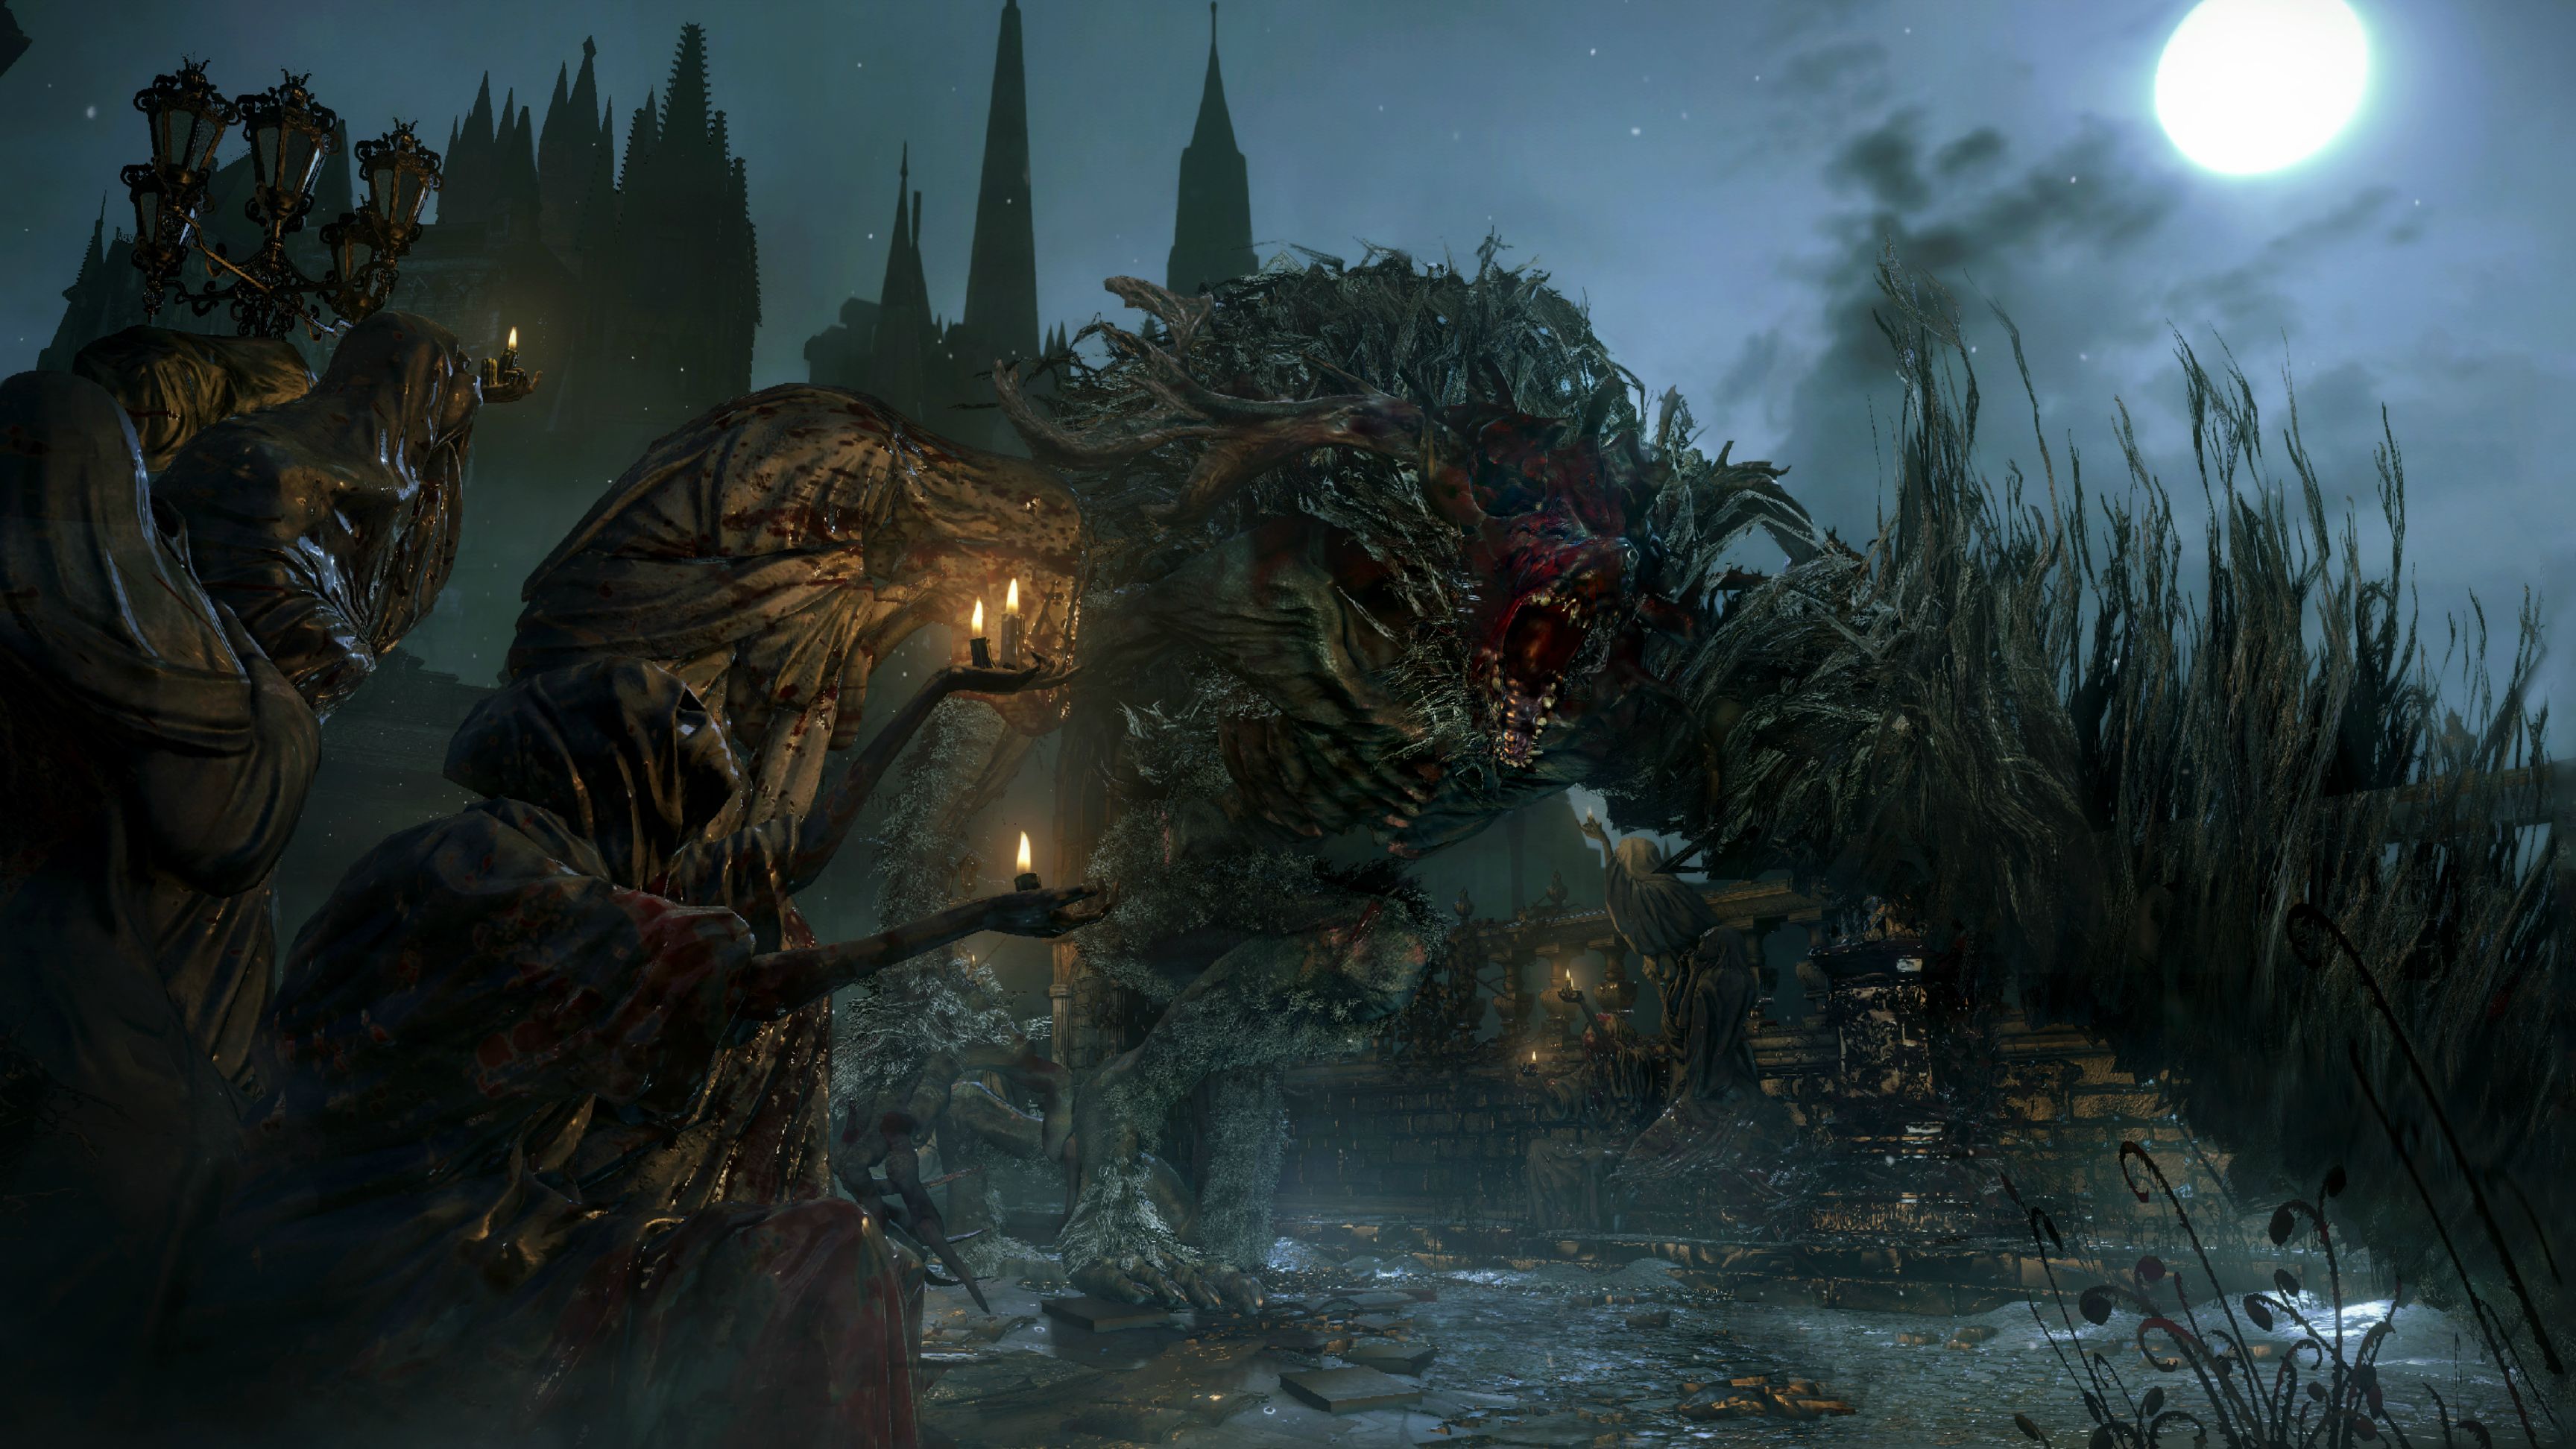 http://vignette2.wikia.nocookie.net/bloodborne/images/a/a6/Cleric_beast.jpg/revision/latest?cb=20140815162124